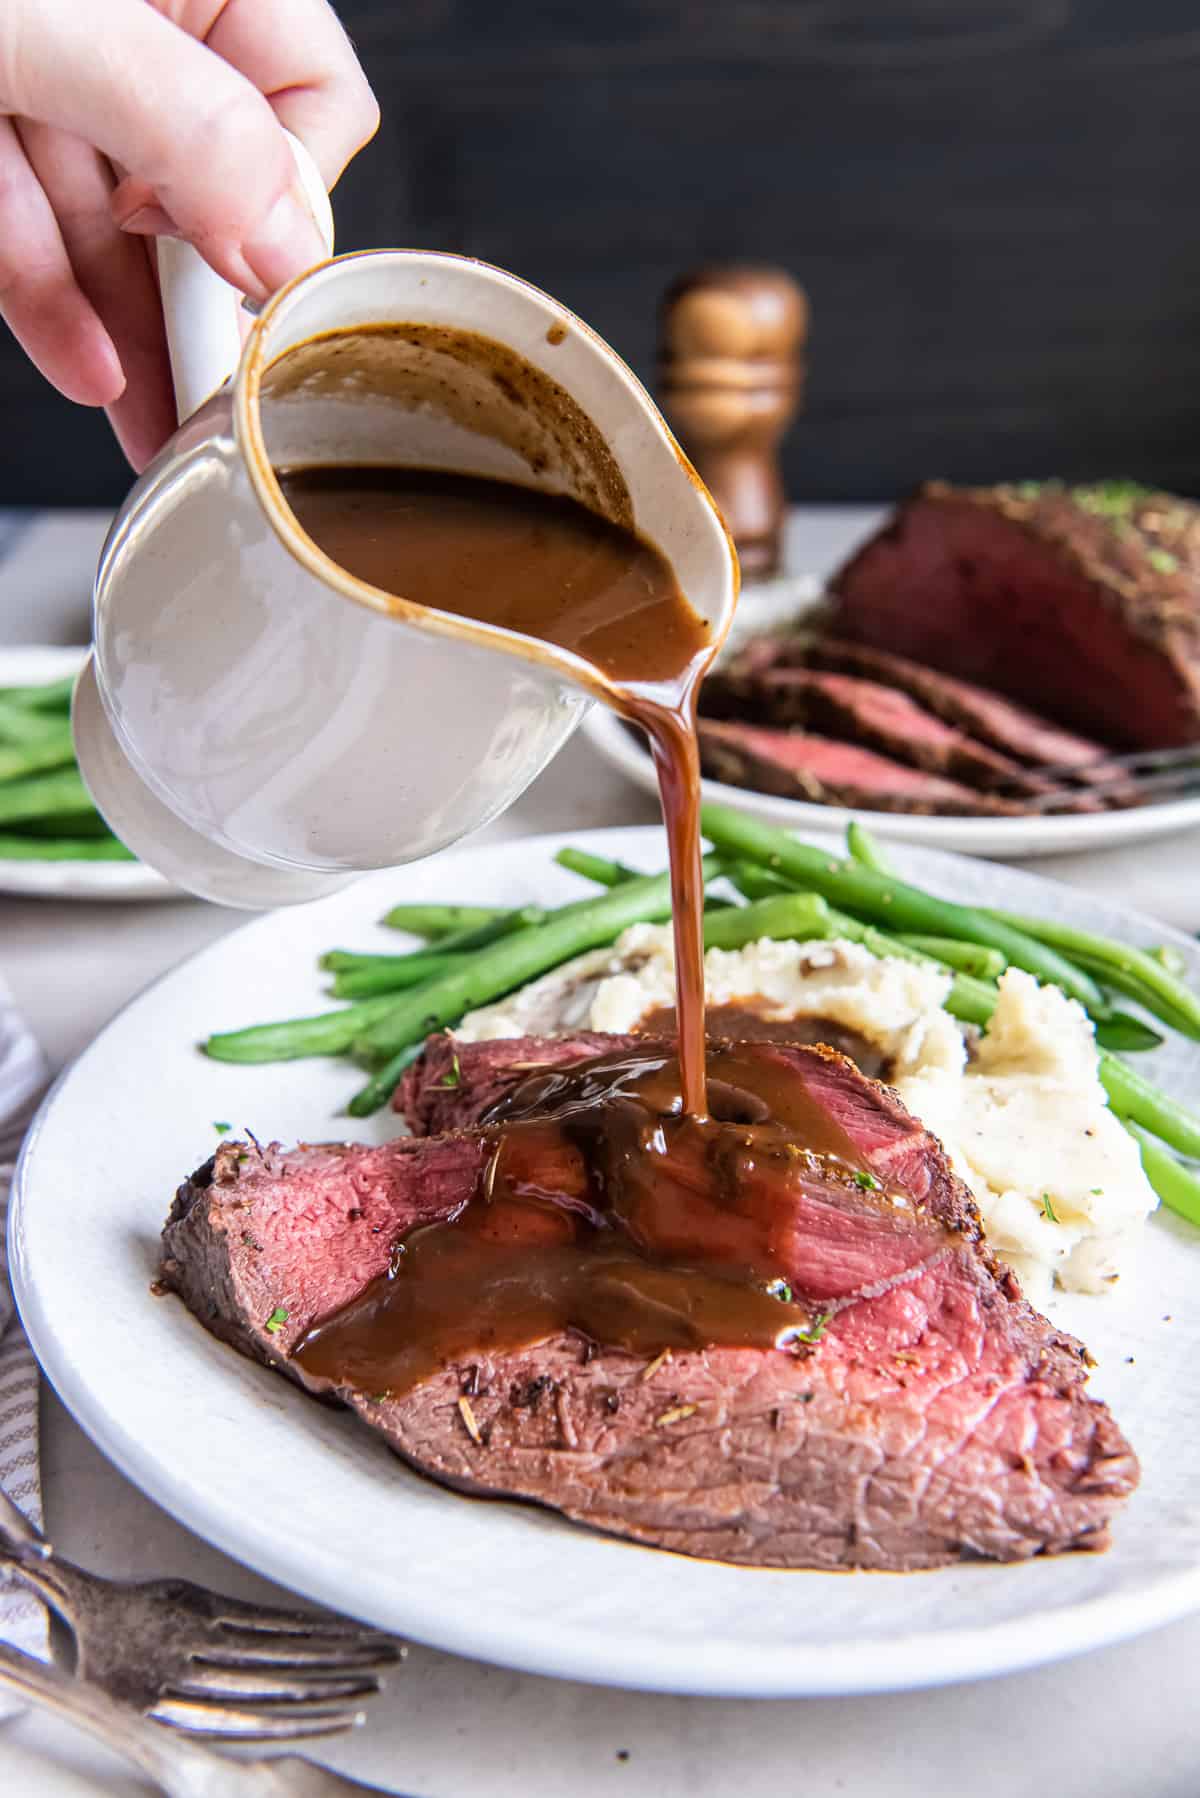 A hand pouring gravy from a gravy boat over slices of cross rib roast on a dinner plate.